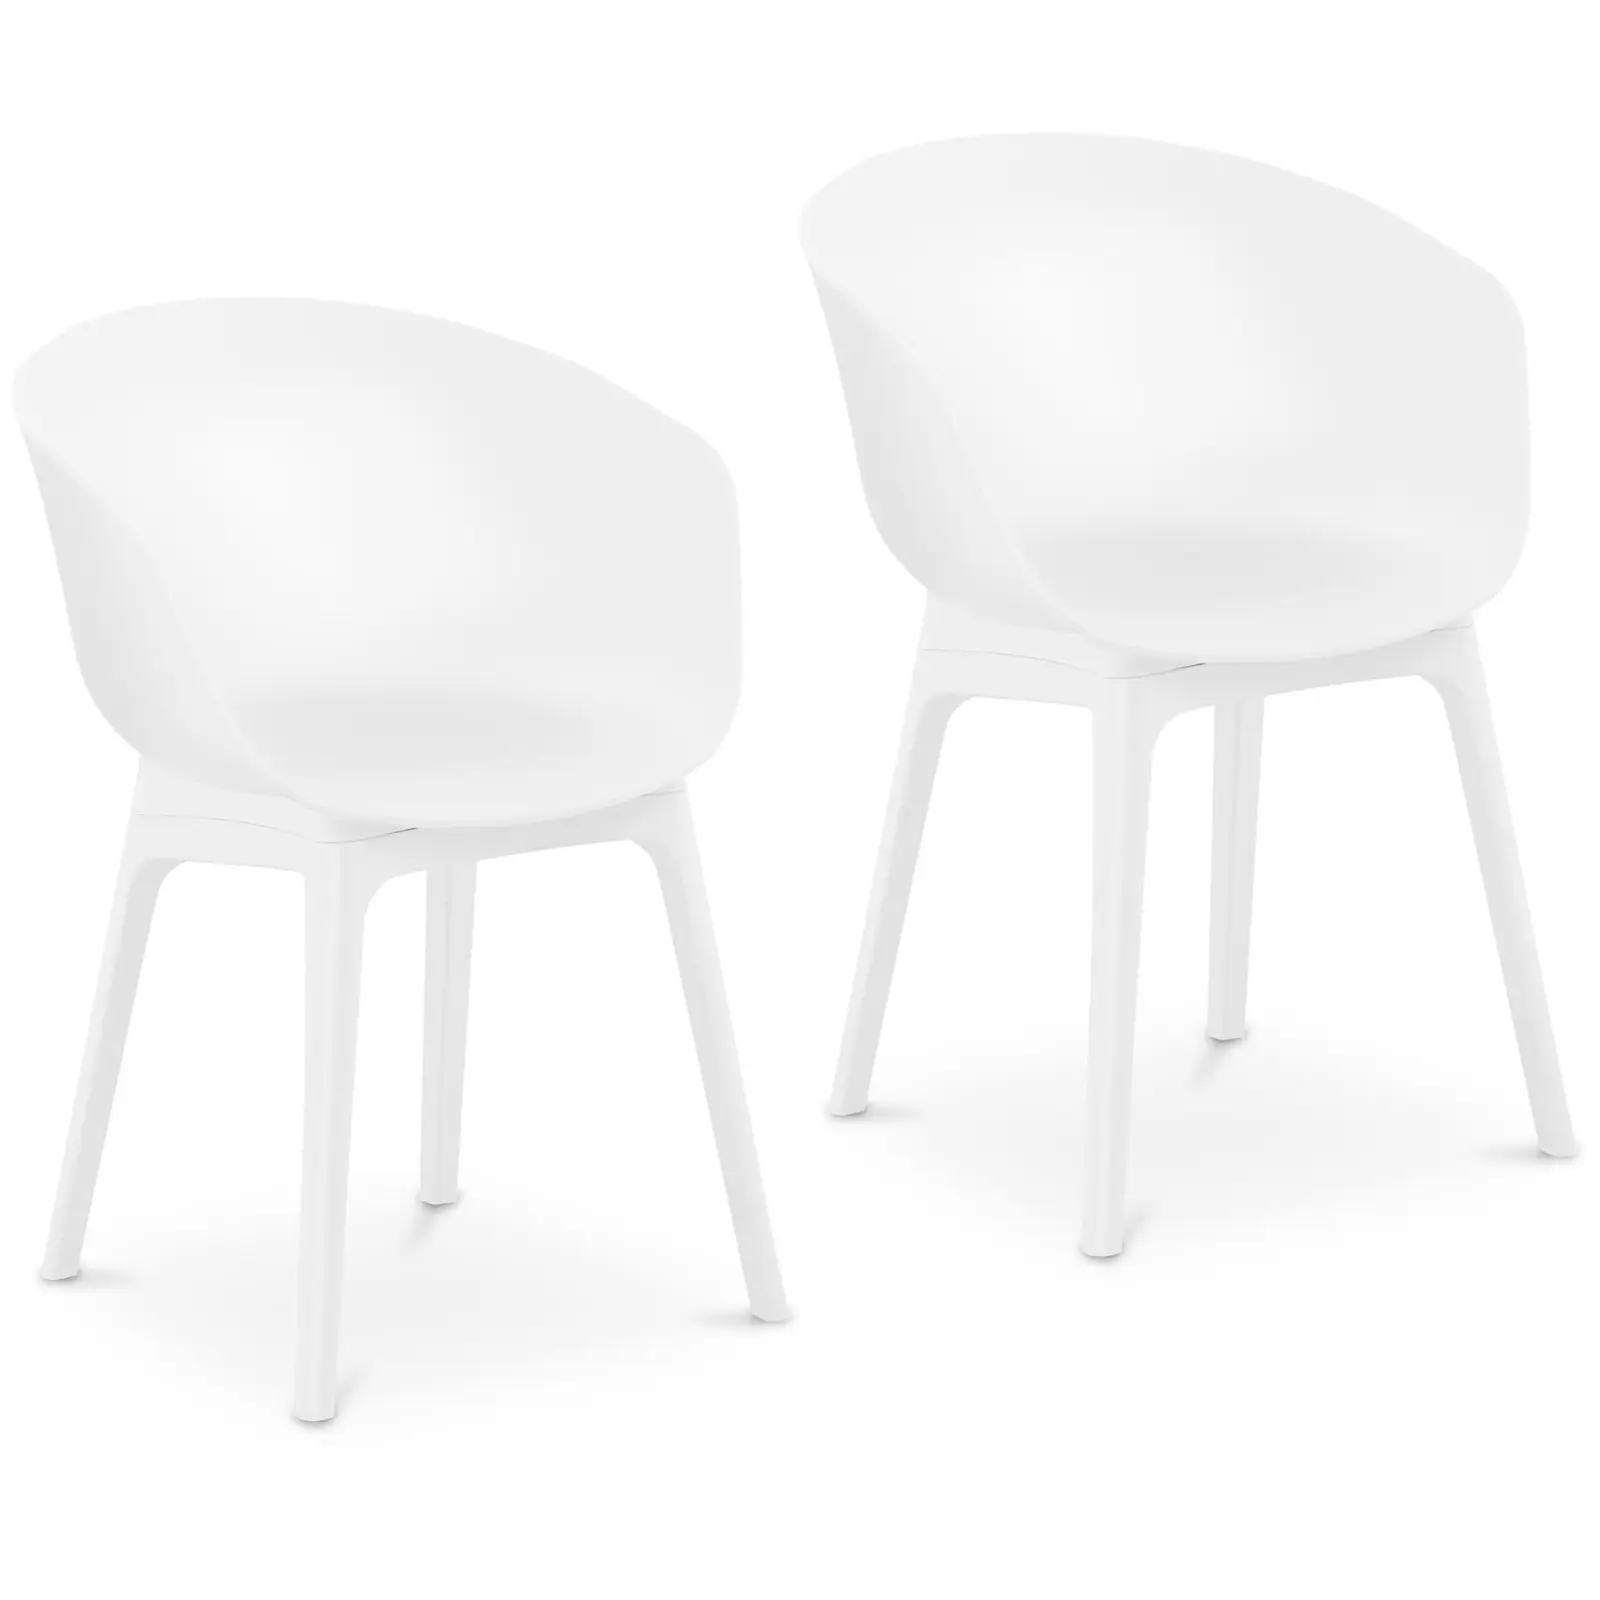 Chair - set of 2 - up to 150 kg - seat 60 x 44 cm - white